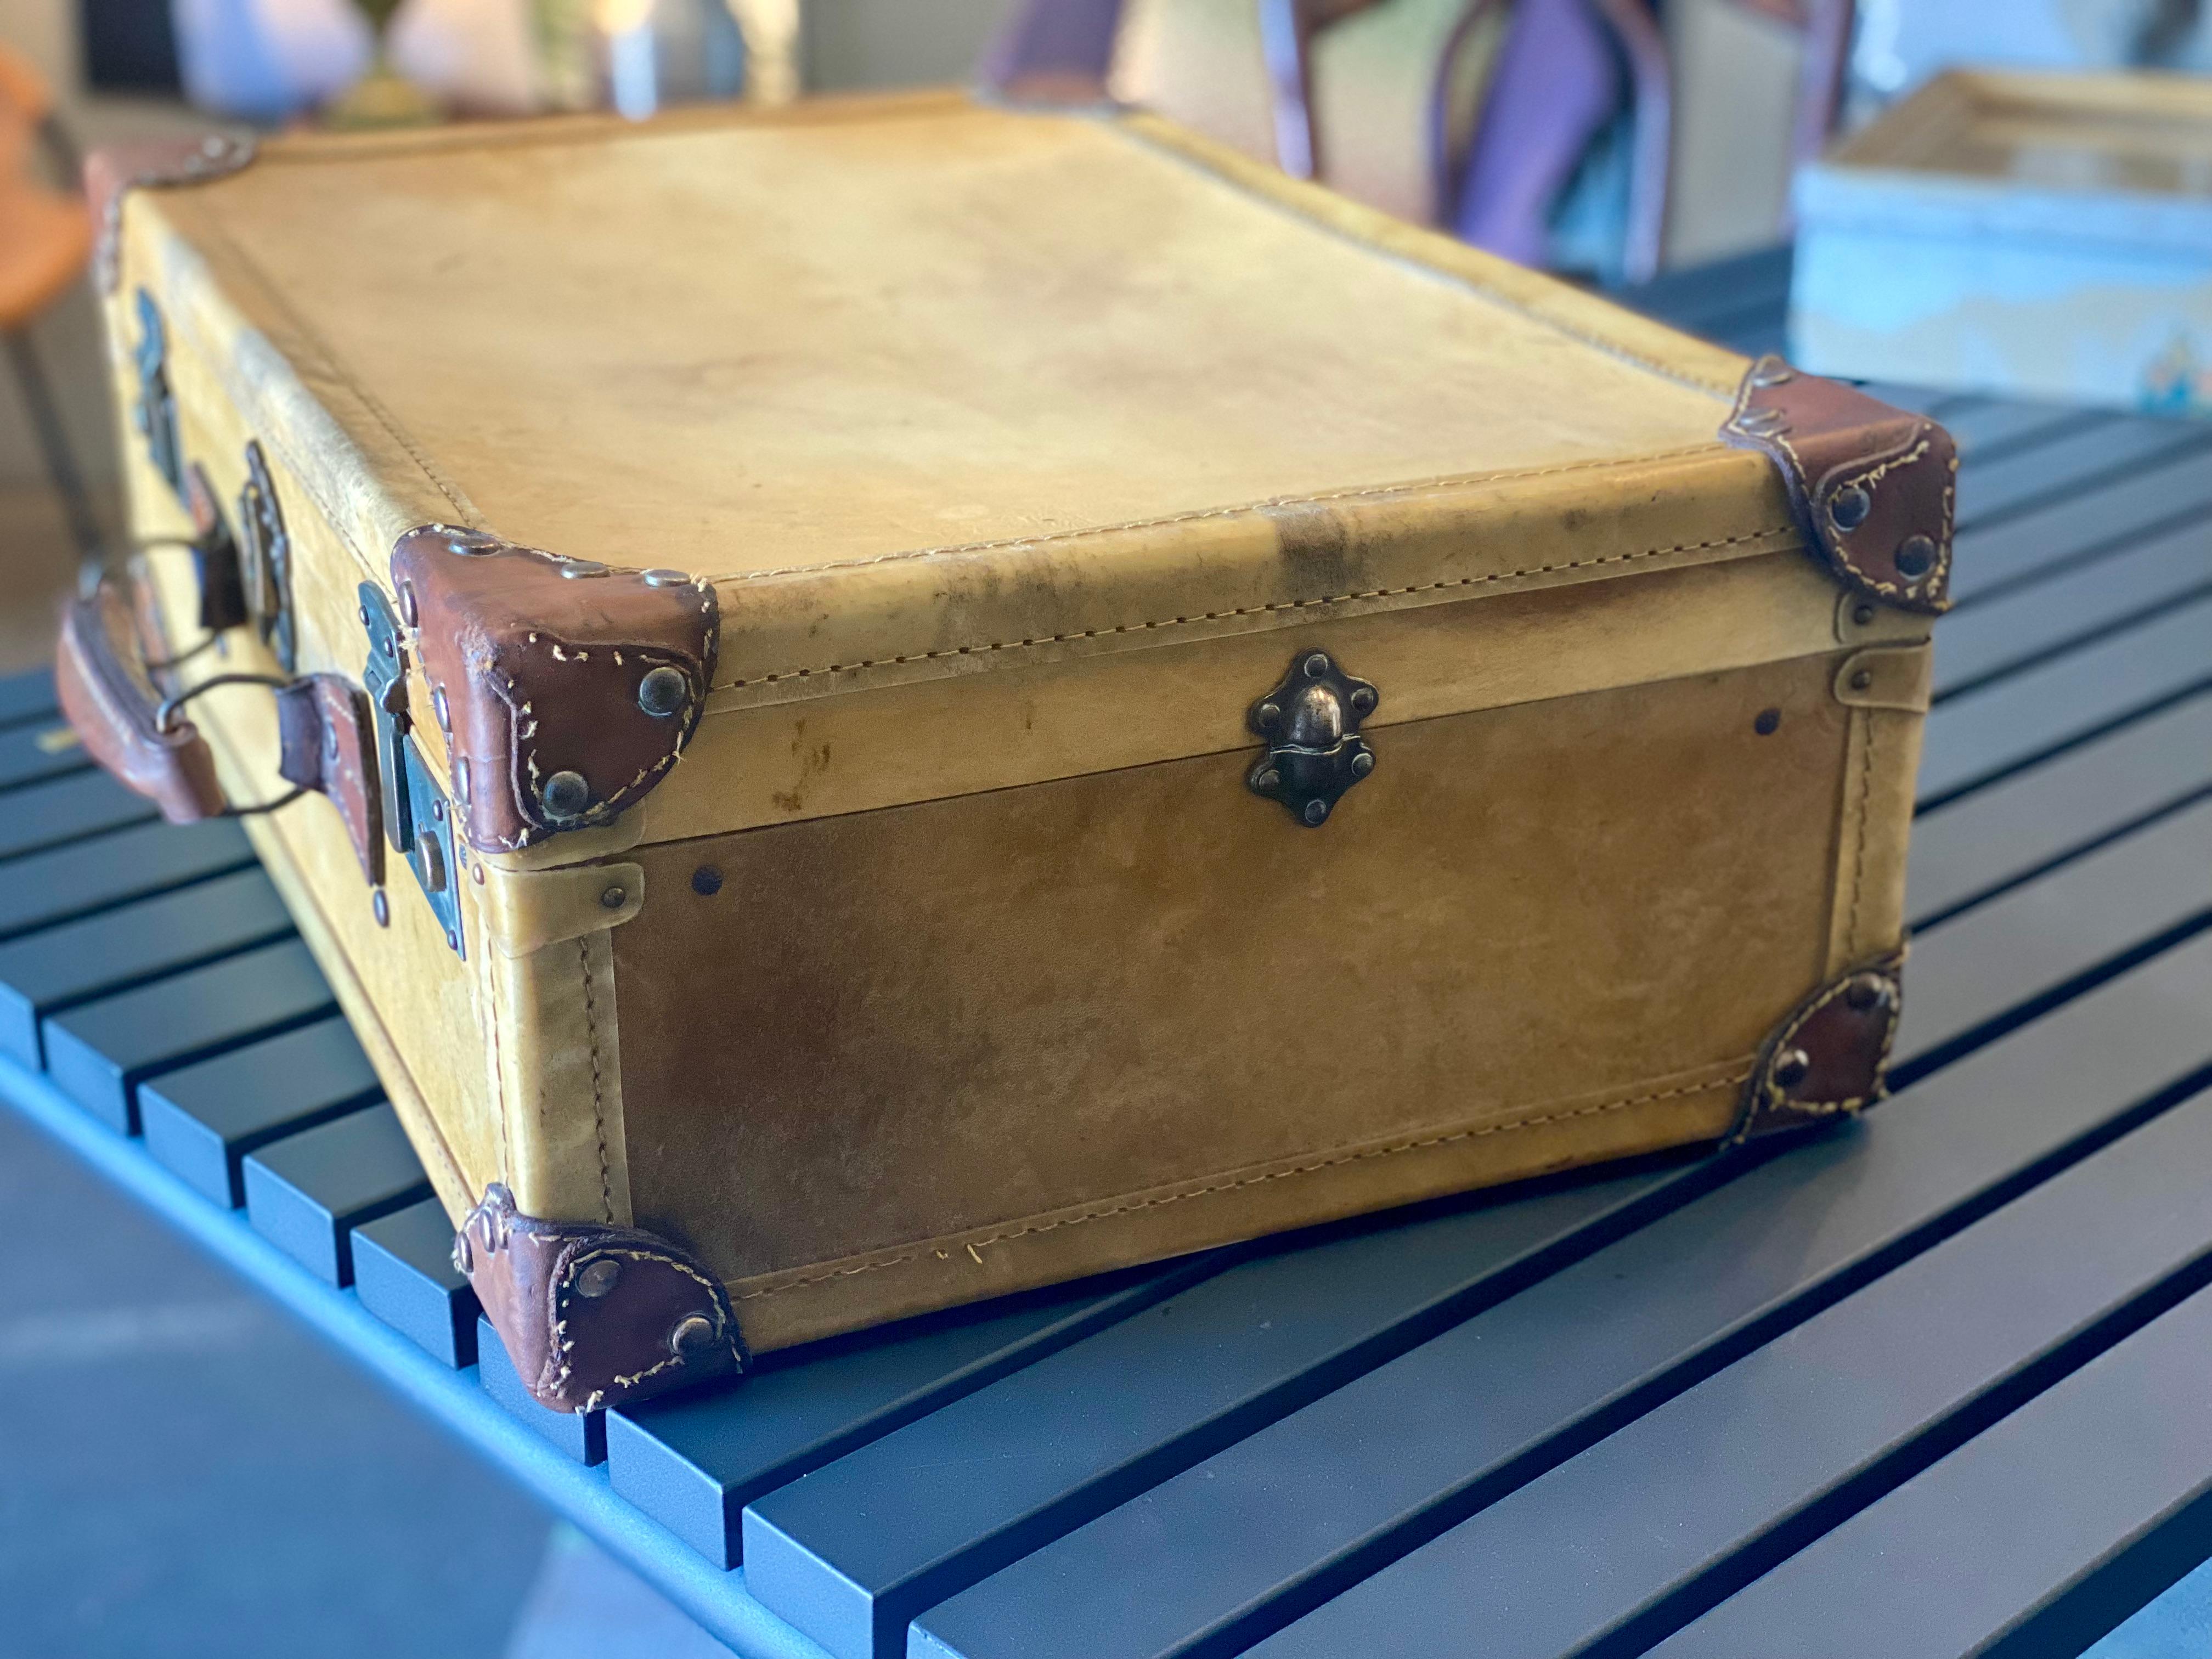 Luxurious Art Deco Suitcase Made of Light Vellum Leather / Parchment with Rivets For Sale 7